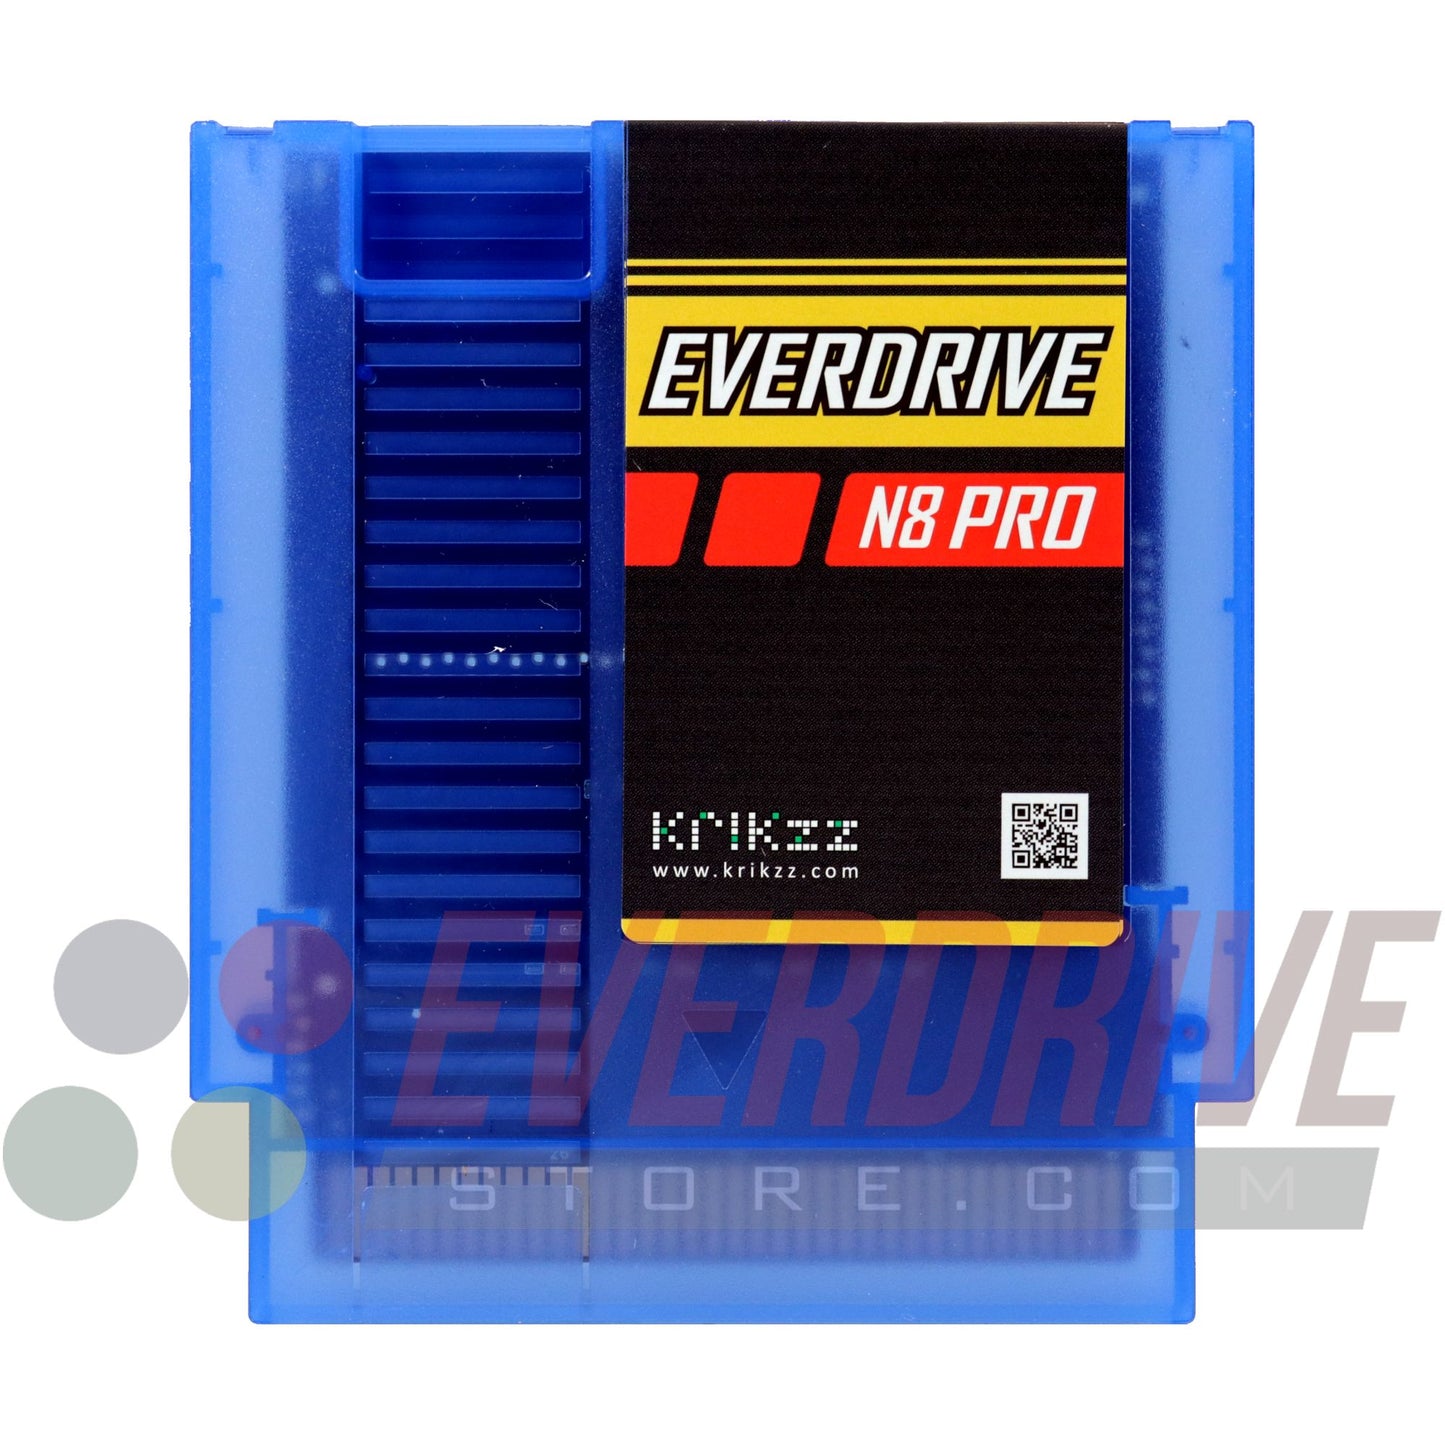 Everdrive N8 PRO - Frosted Blue